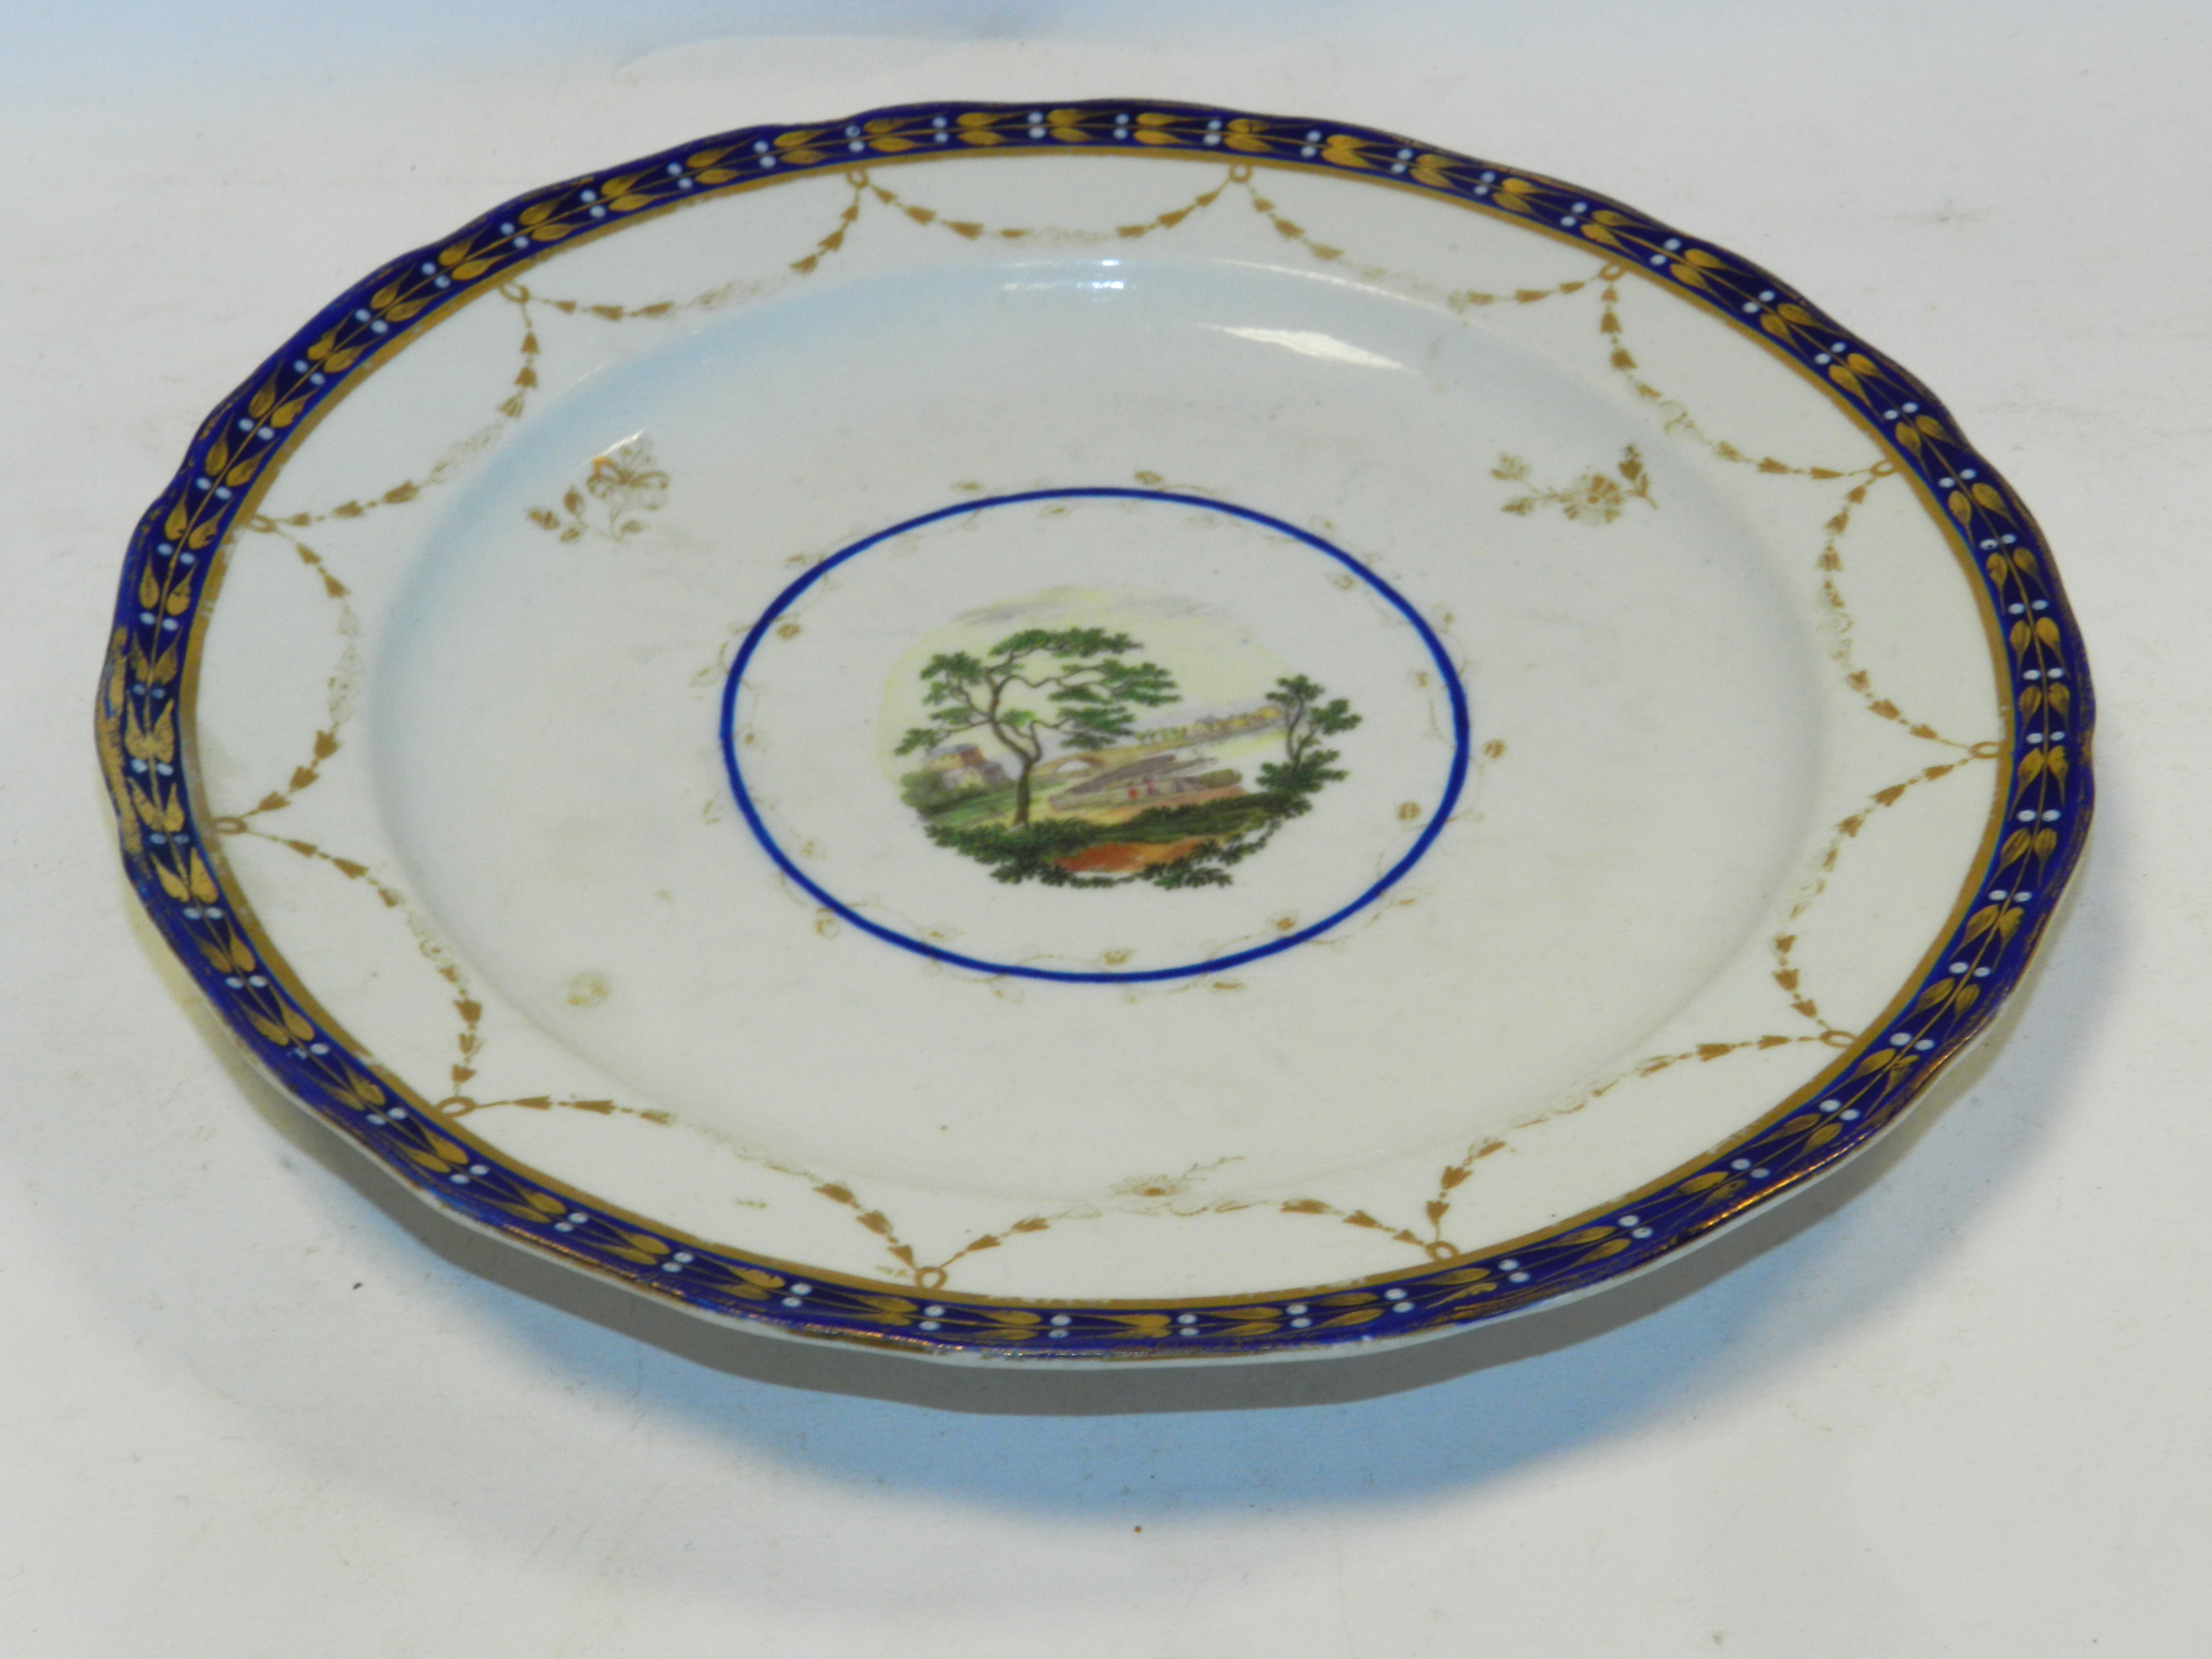 An English porcelain landscape plate, possibly Derby, circa 1790, - Image 2 of 2